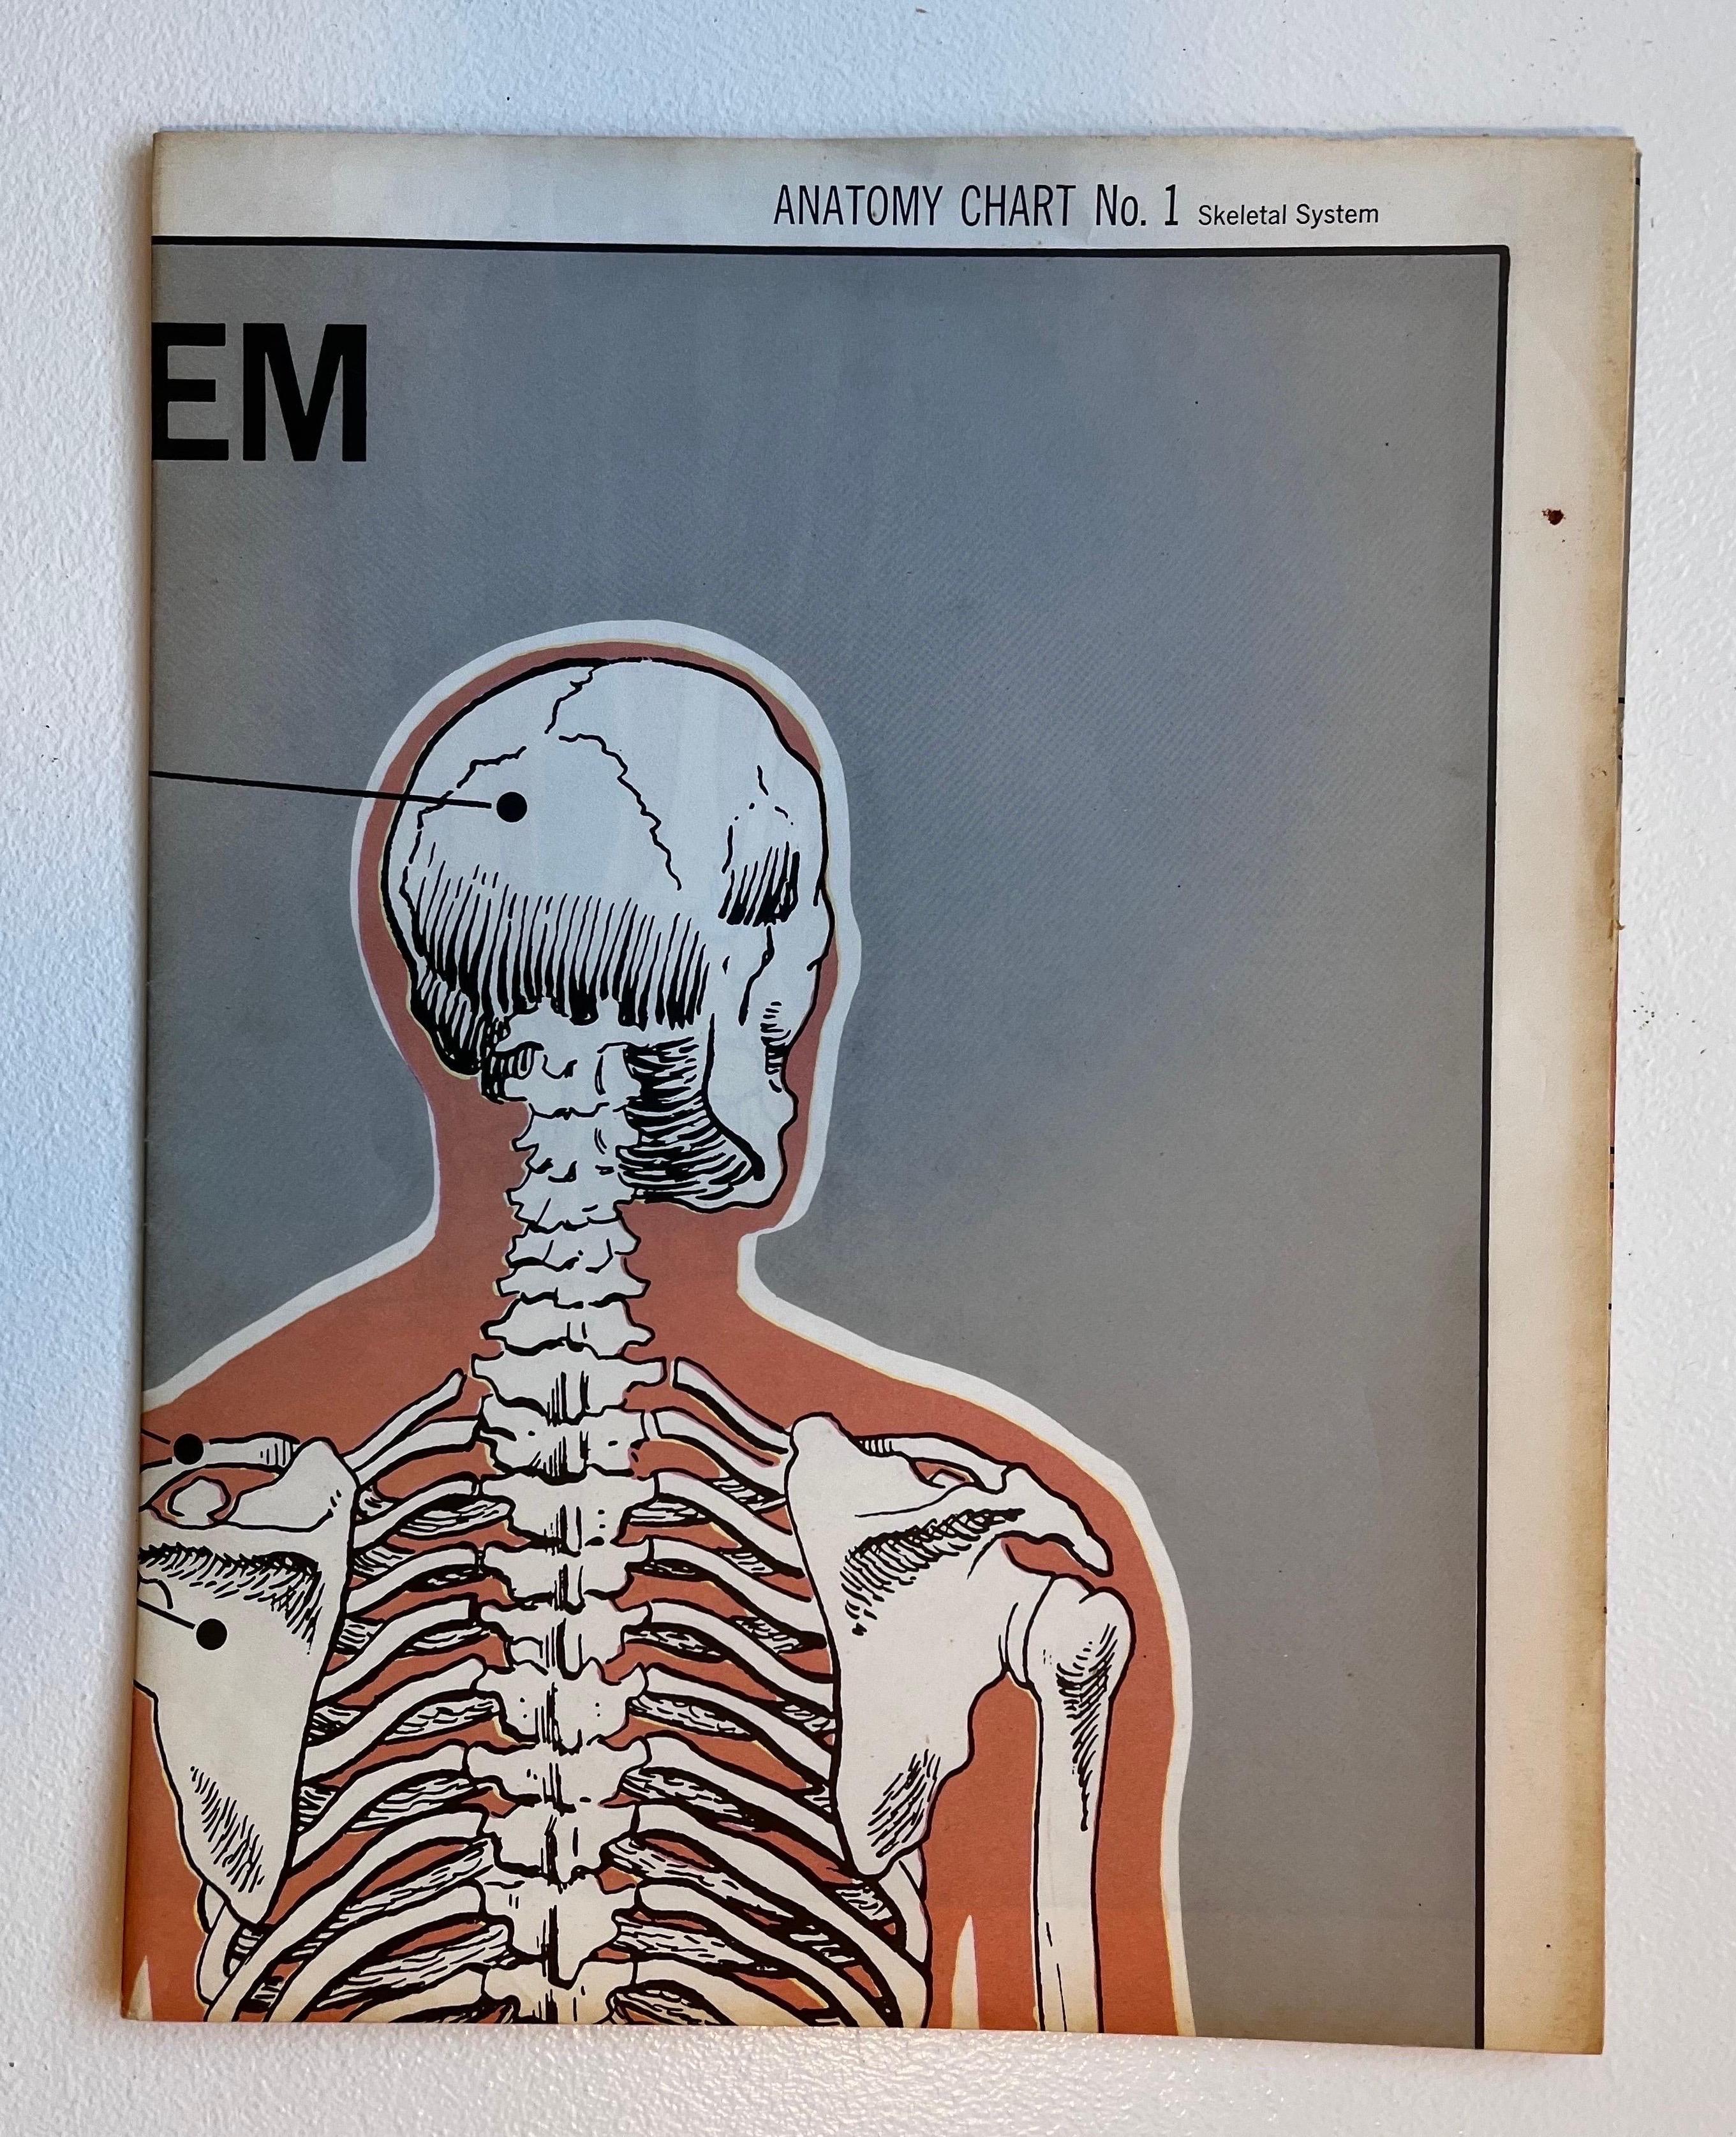 The Skeletal System Poster by American Map Co. - Circa 1950.

29